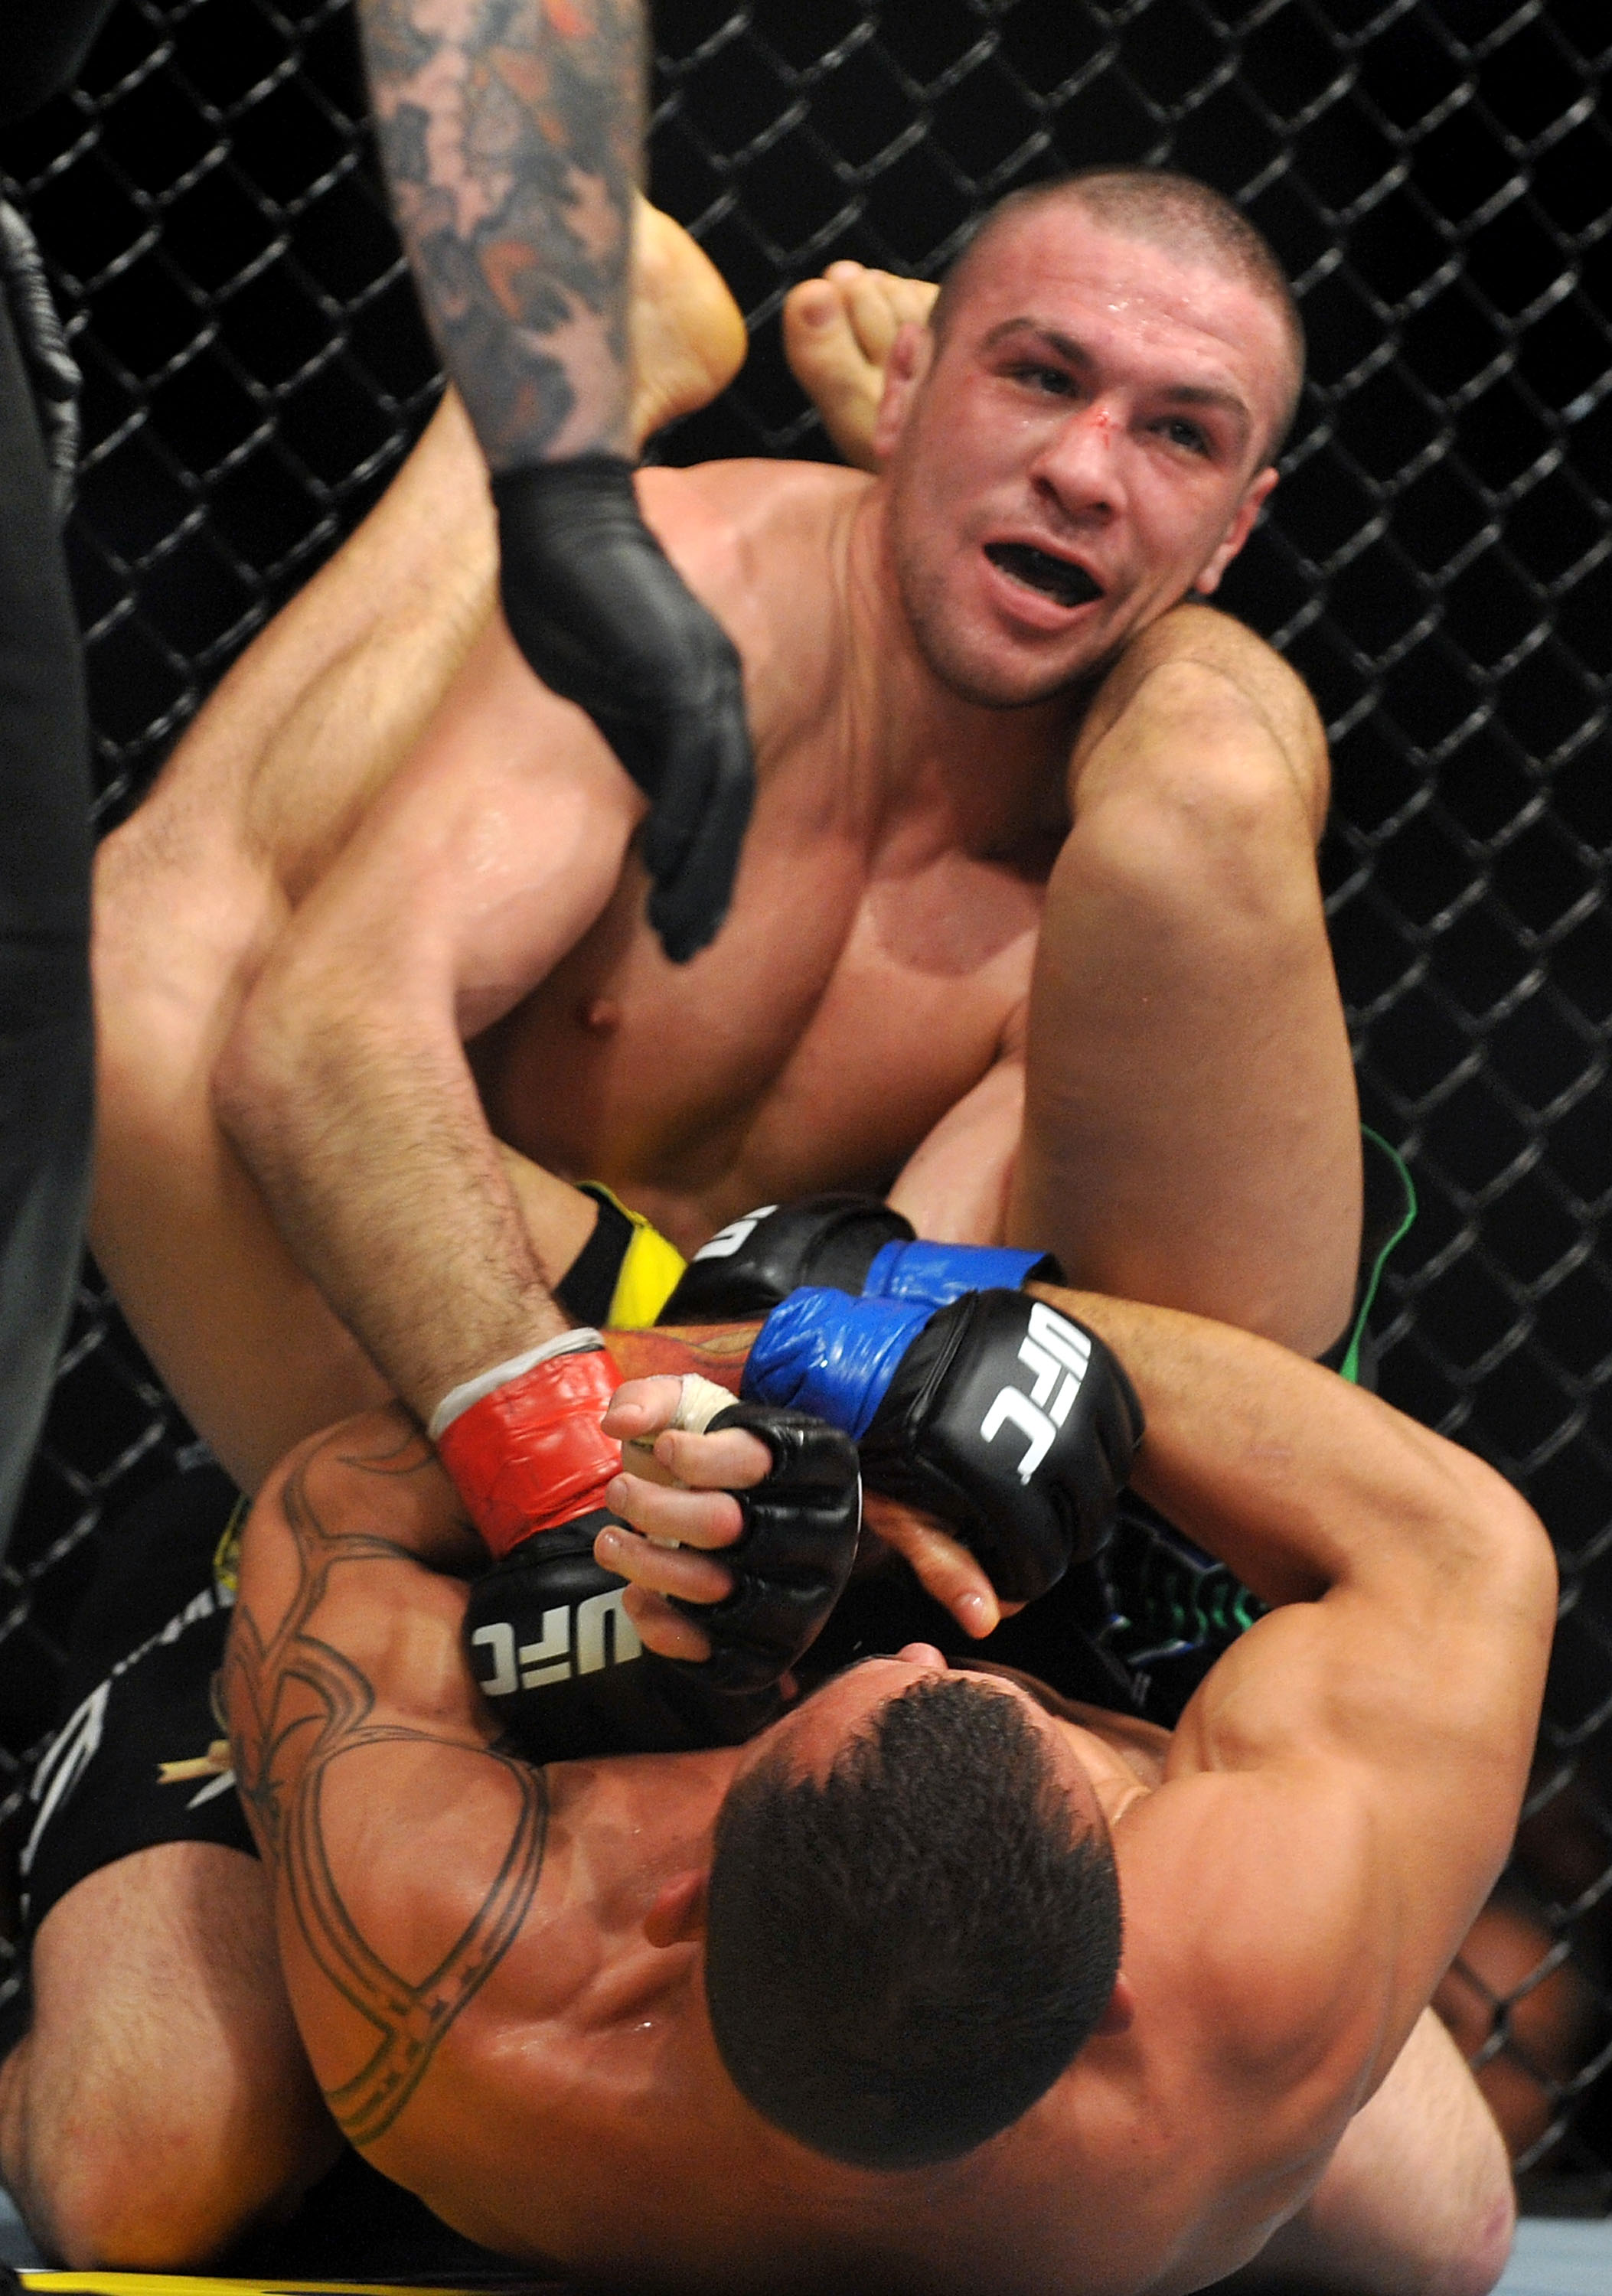 LOS ANGELES, CA - OCTOBER 24:  UFC fighter Gleison Tibau (top) battles with UFC fighter Josh Neer (top) during their Lightweight 'Swing' bout at UFC 104: Machida vs. Shogun at Staples Center on October 24, 2009 in Los Angeles, California.  (Photo by Jon K